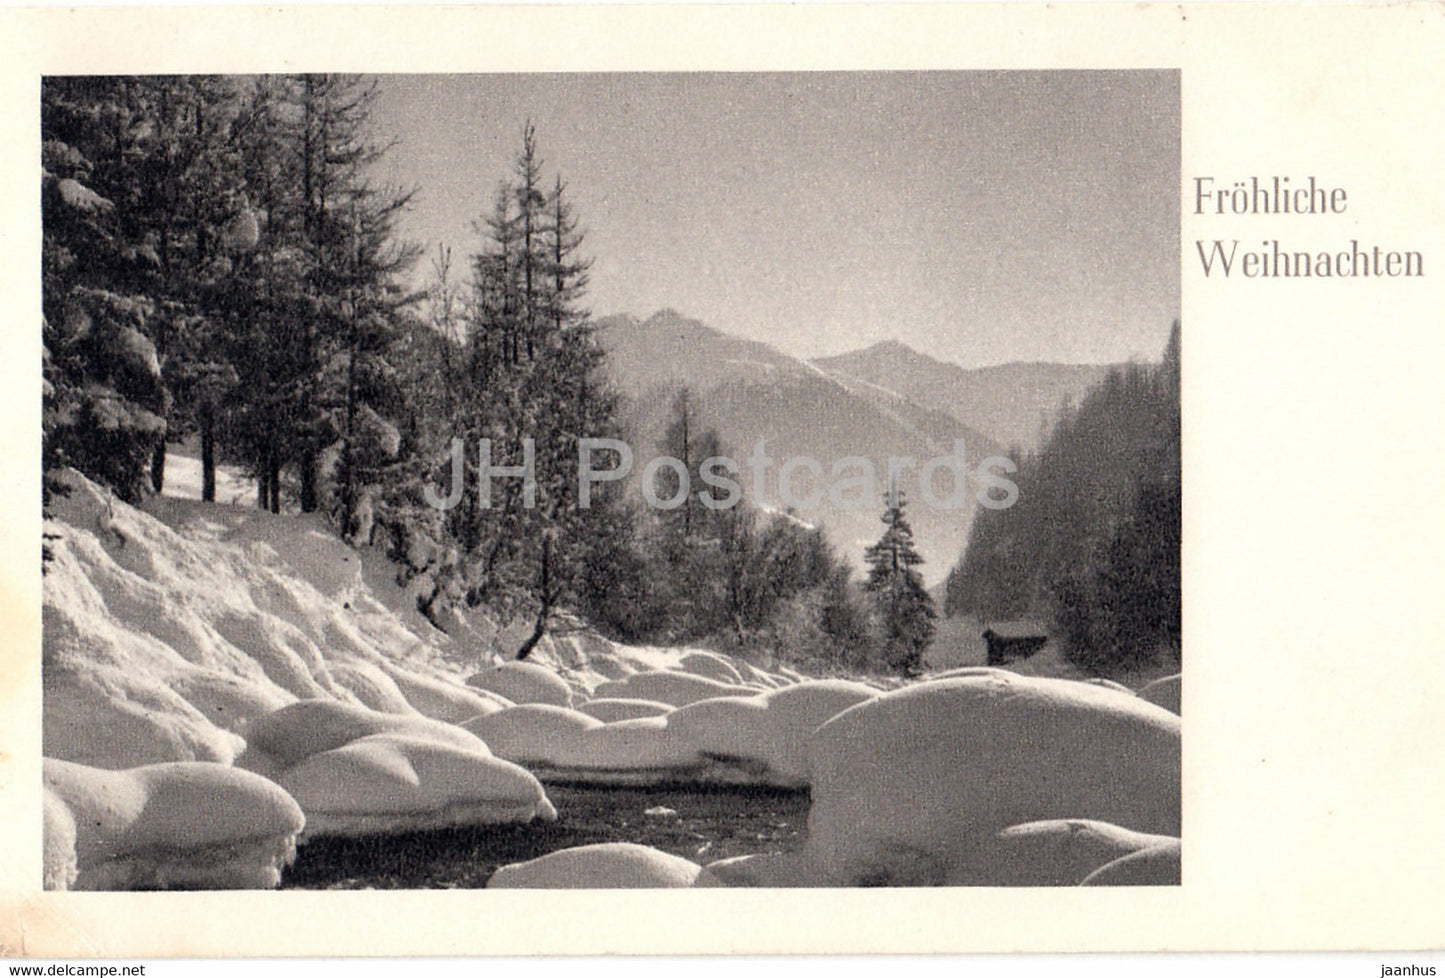 Christmas Greeting Card - Frohliche Weihnachten - winter nature - BRB 1904 - old postcard - 1947 - Germany - used - JH Postcards